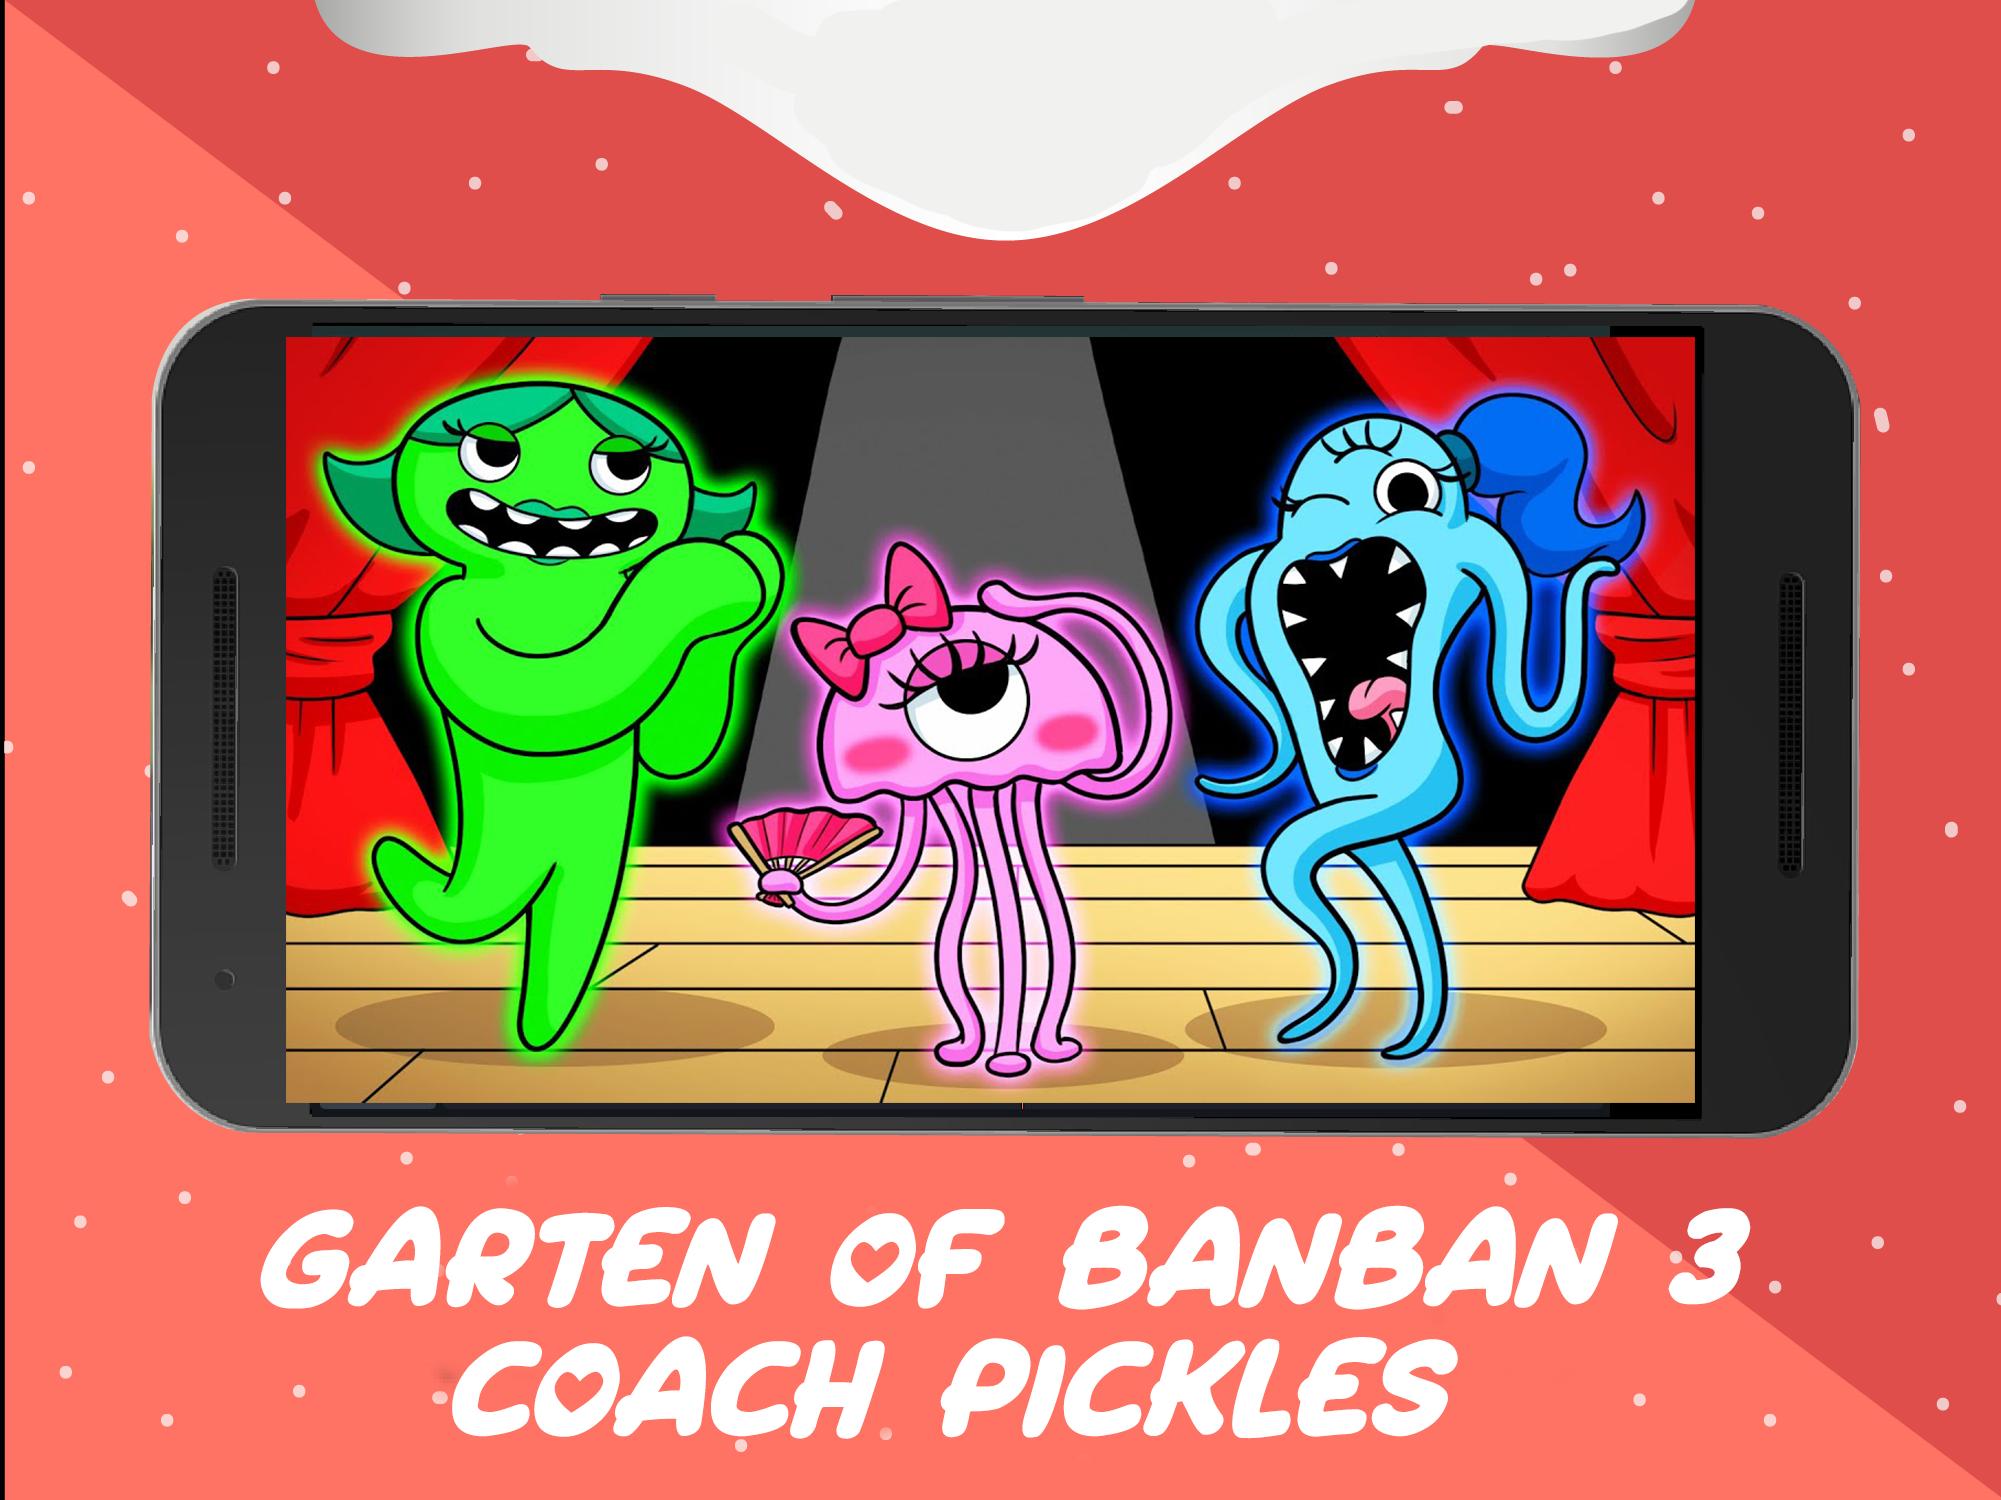 my design of the garten of banban characters!!! :3 by